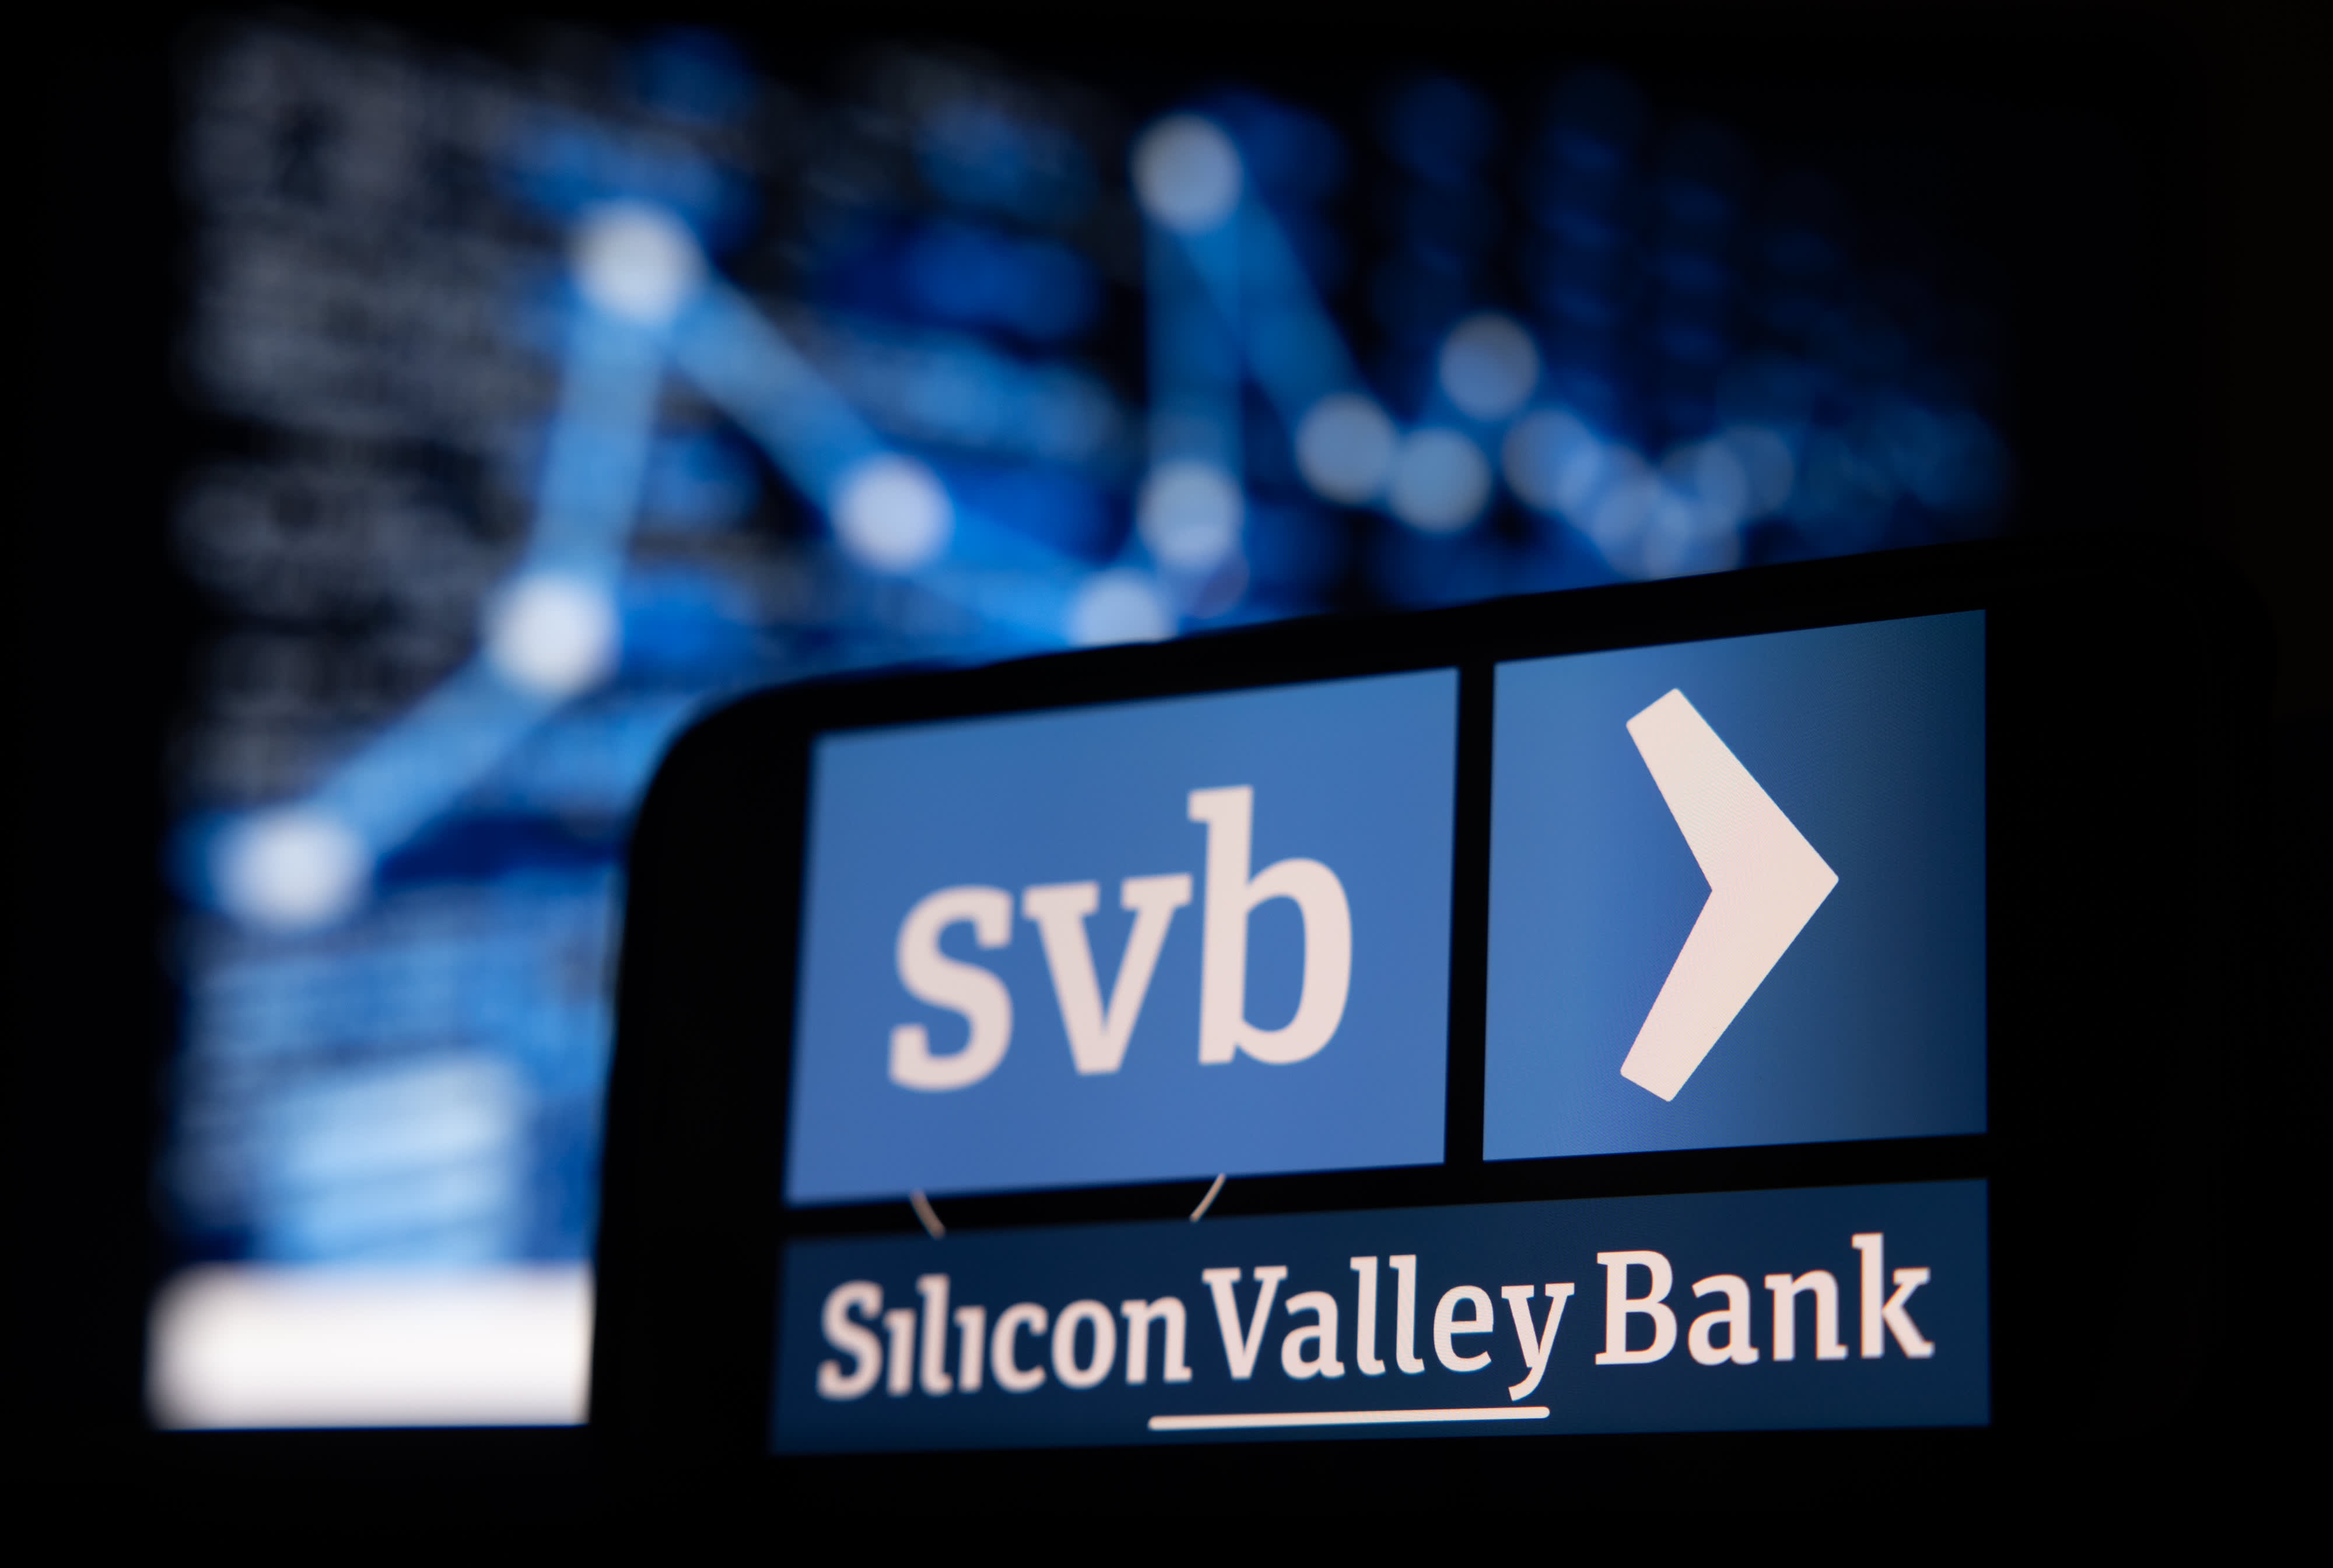 SVB collapse: Silicon Valley's 'greed and avarice' to blame, trader says